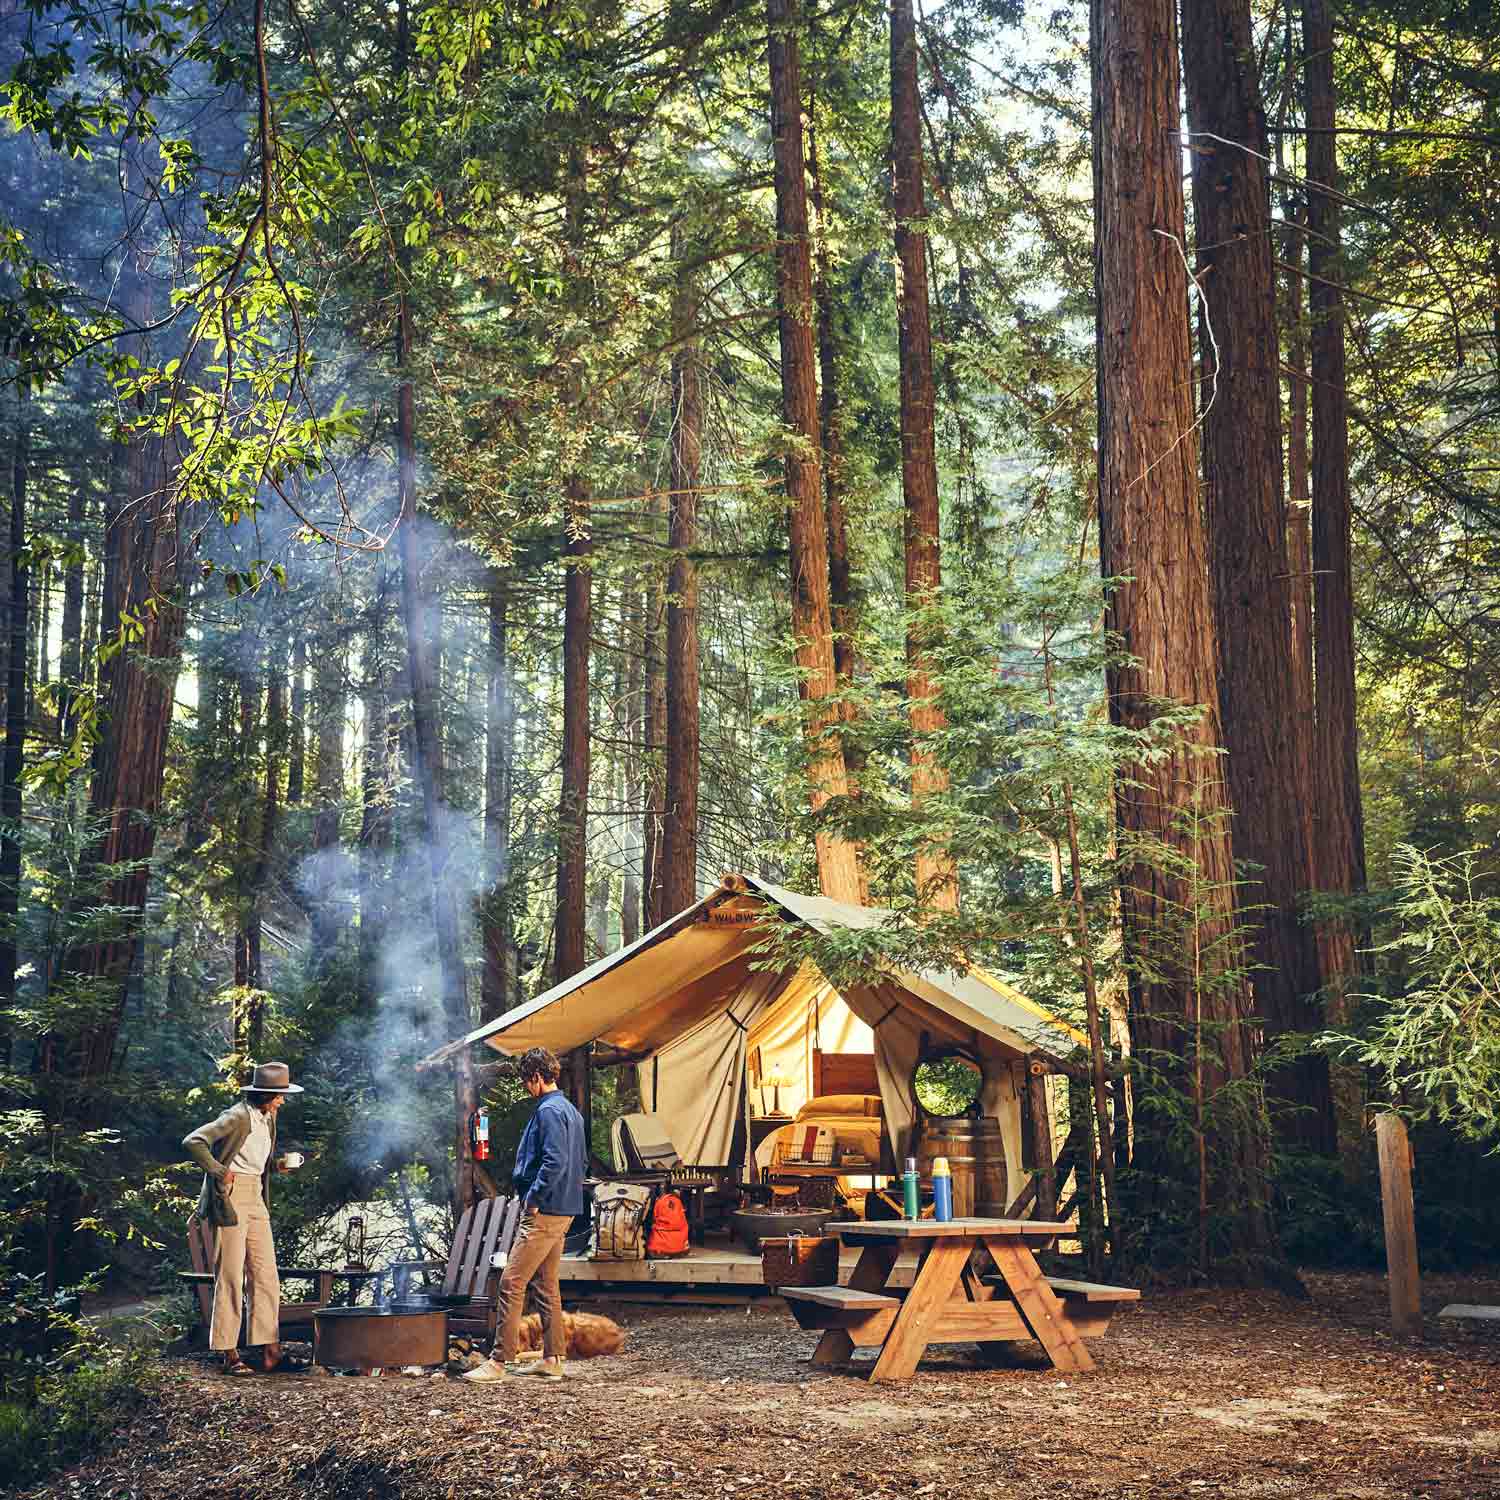 Indoor camping, the American trend coming to a hotel near you